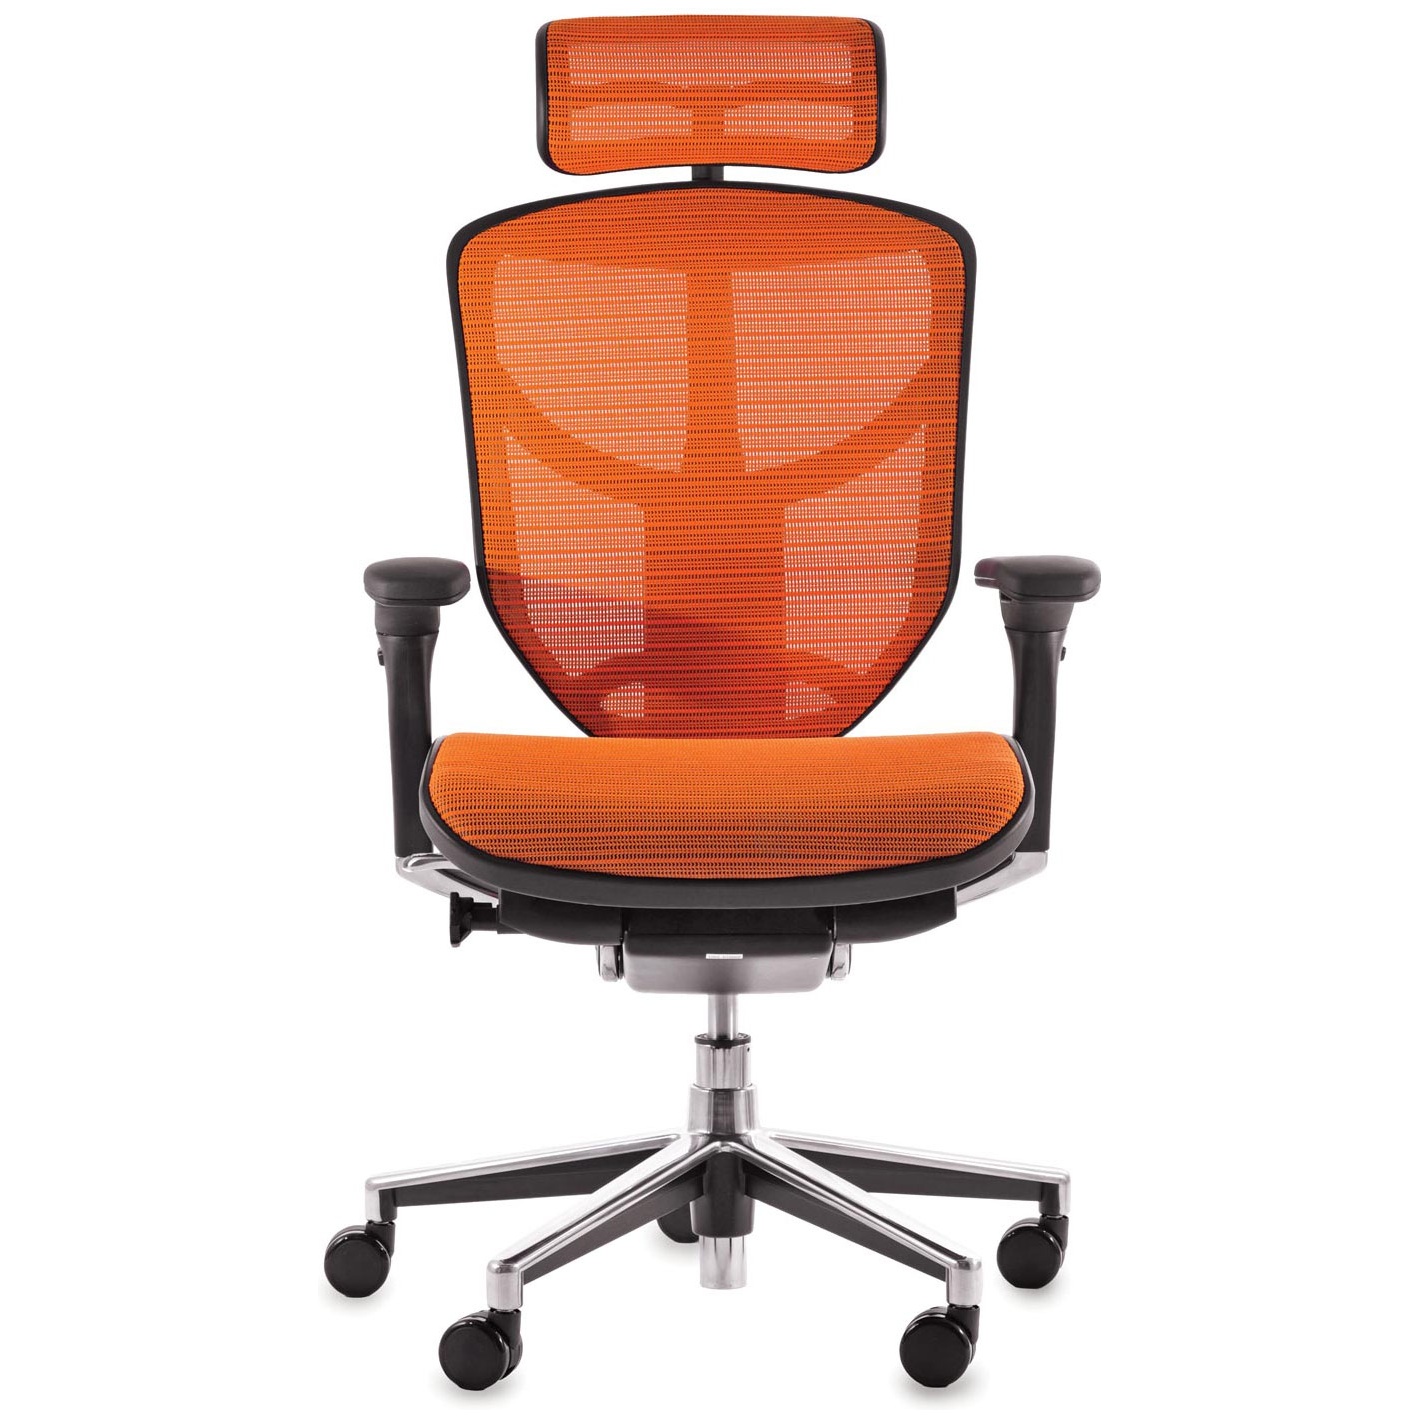 Enjoy Mesh Office Chairs (With Headrest)